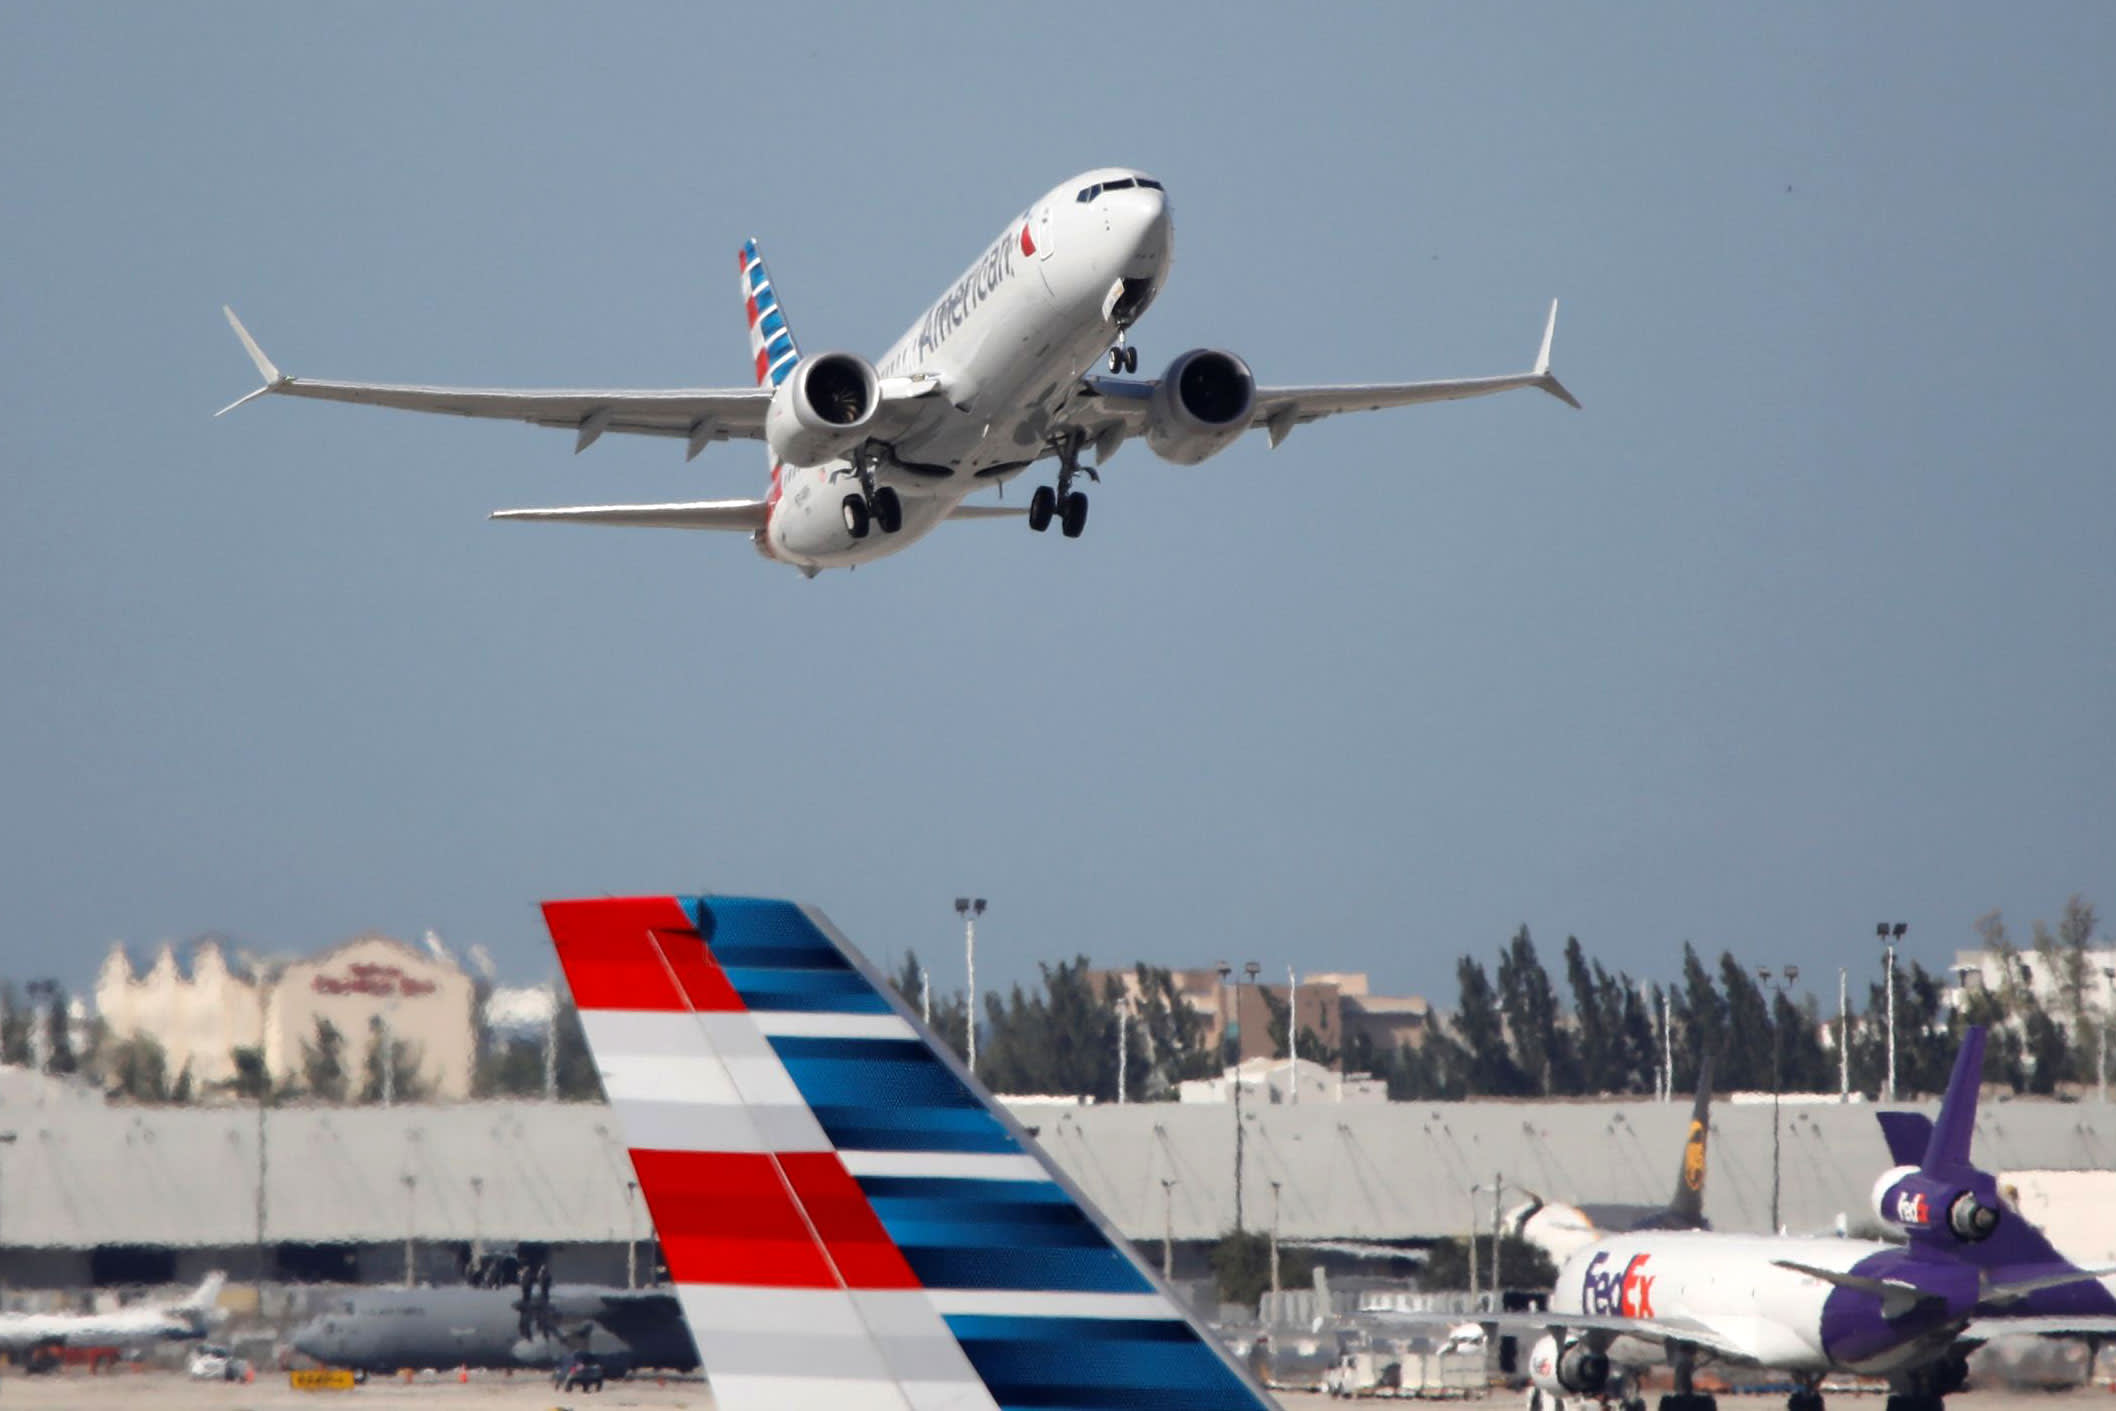 American Airlines plans another $ 1 billion share sale after major march